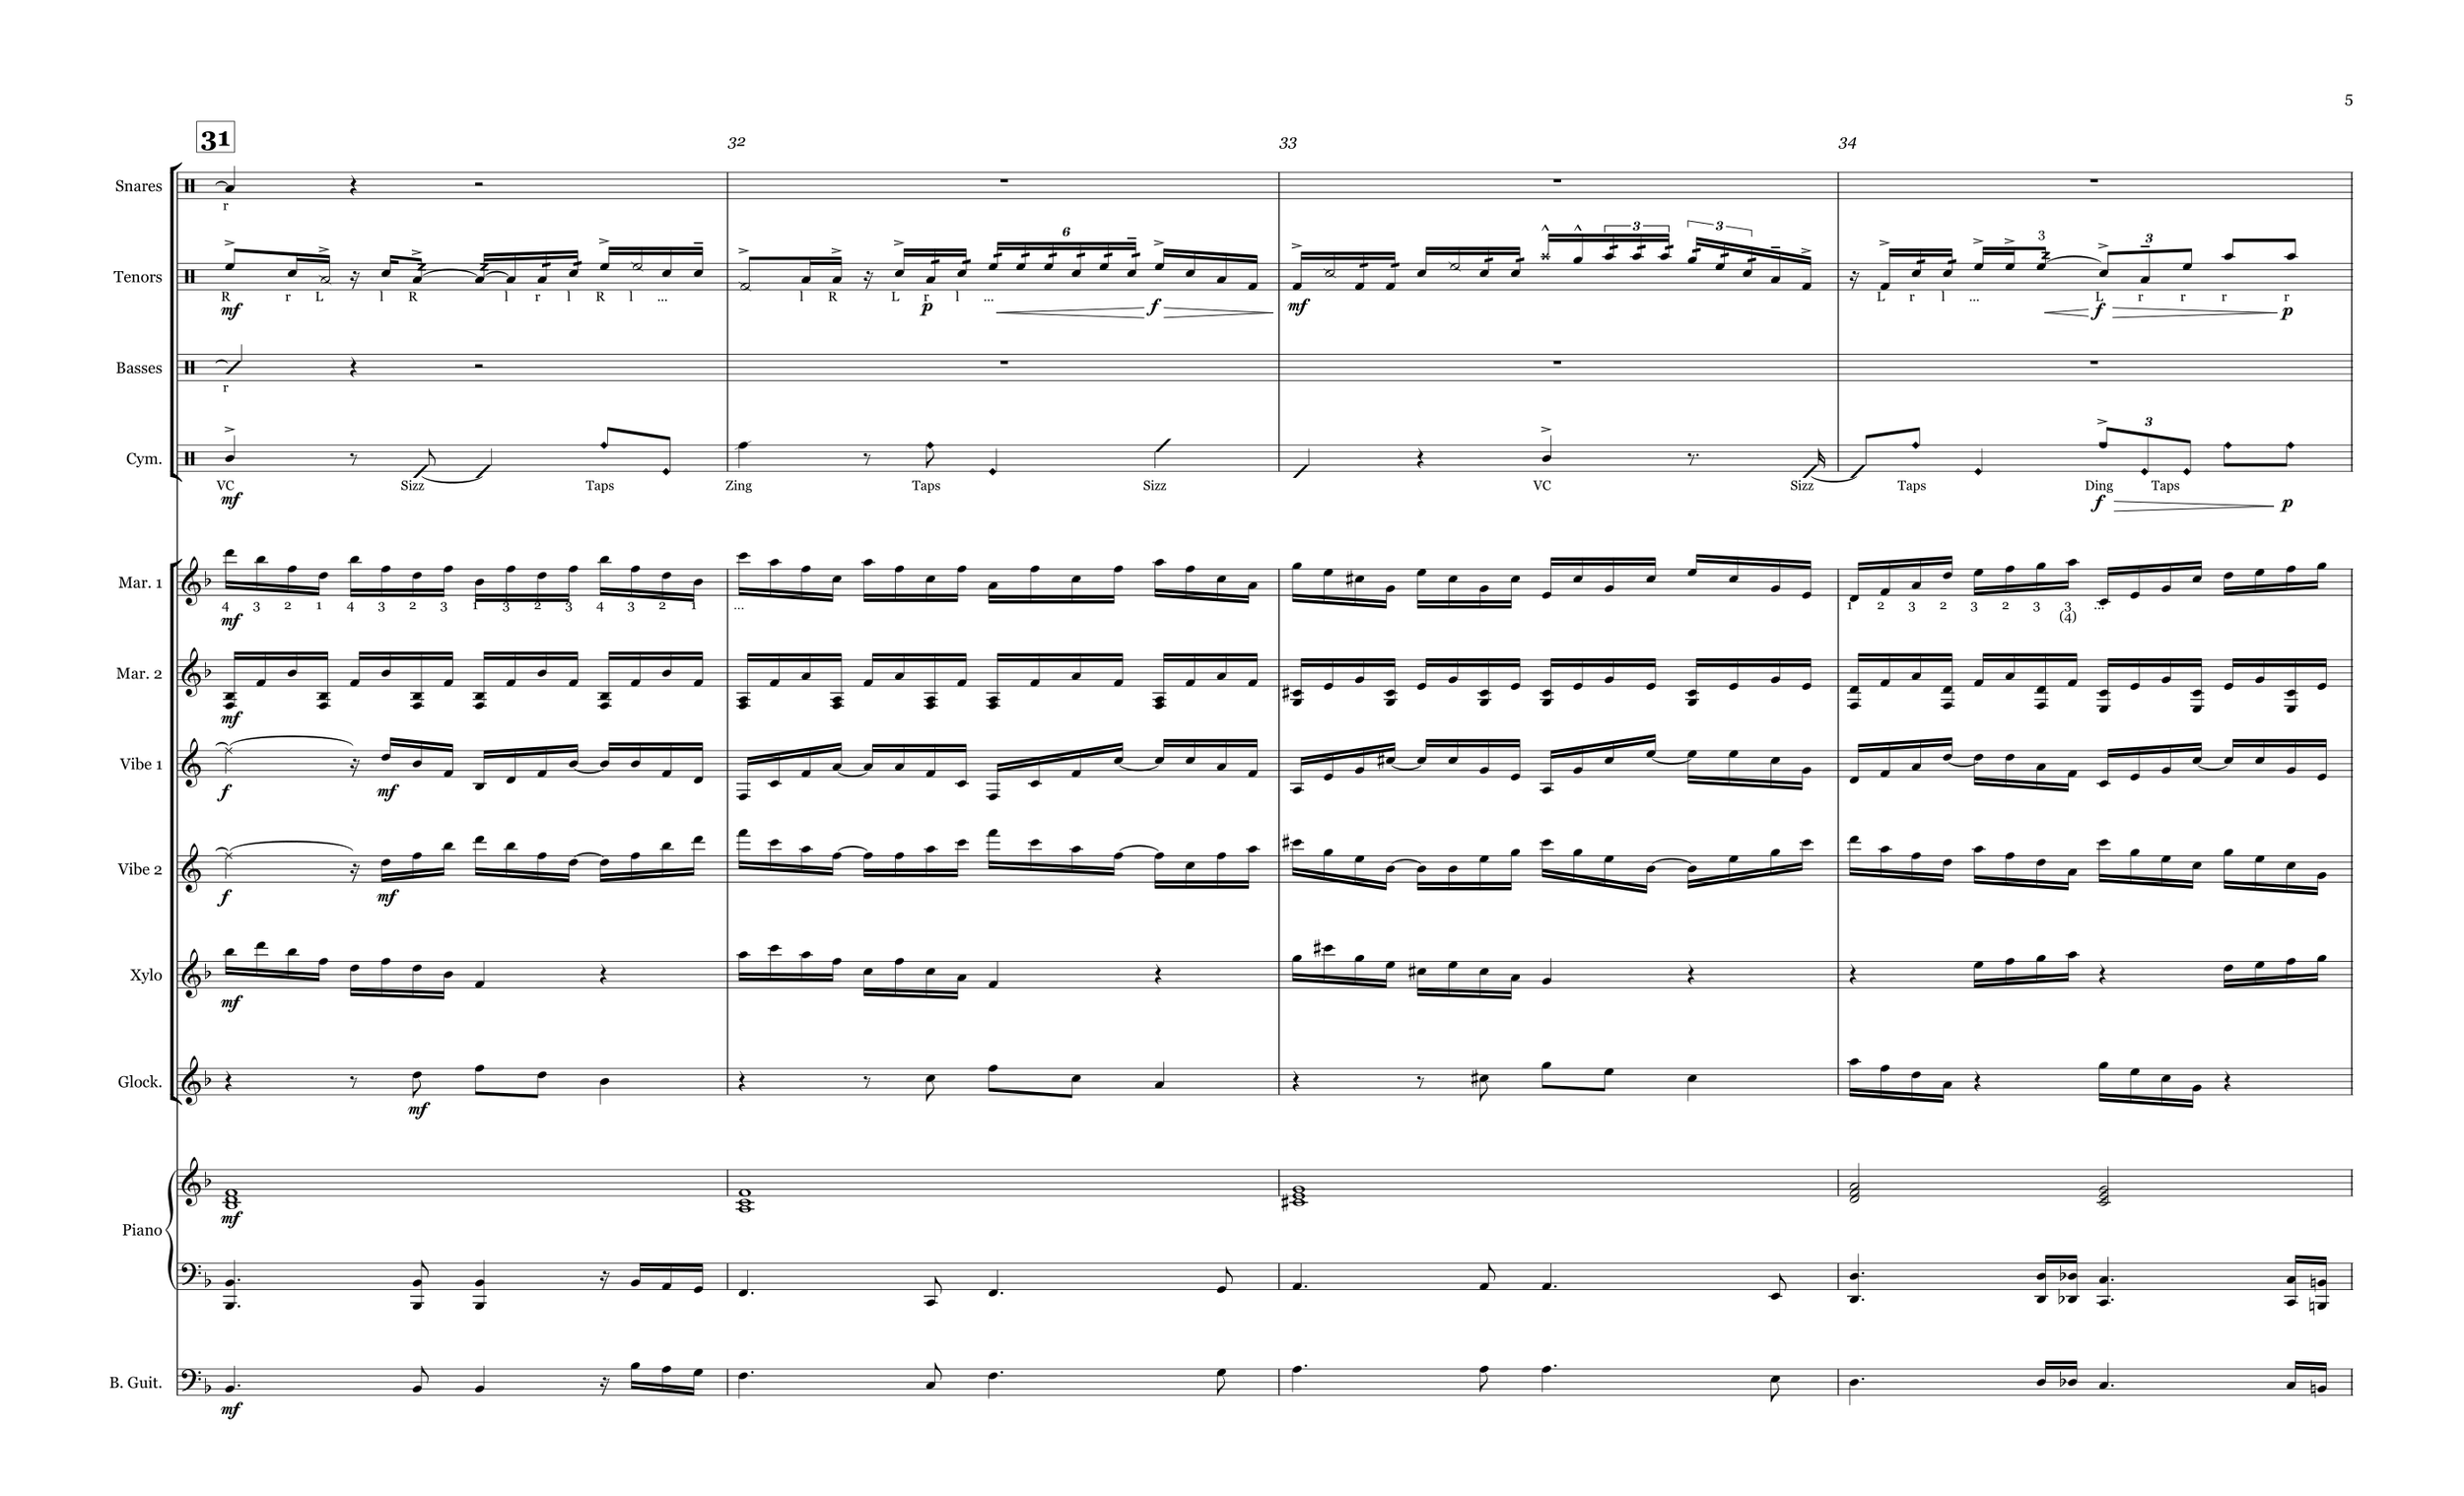 Stand Up Percussion Score Final - Full Score (legal for YT)-05.png